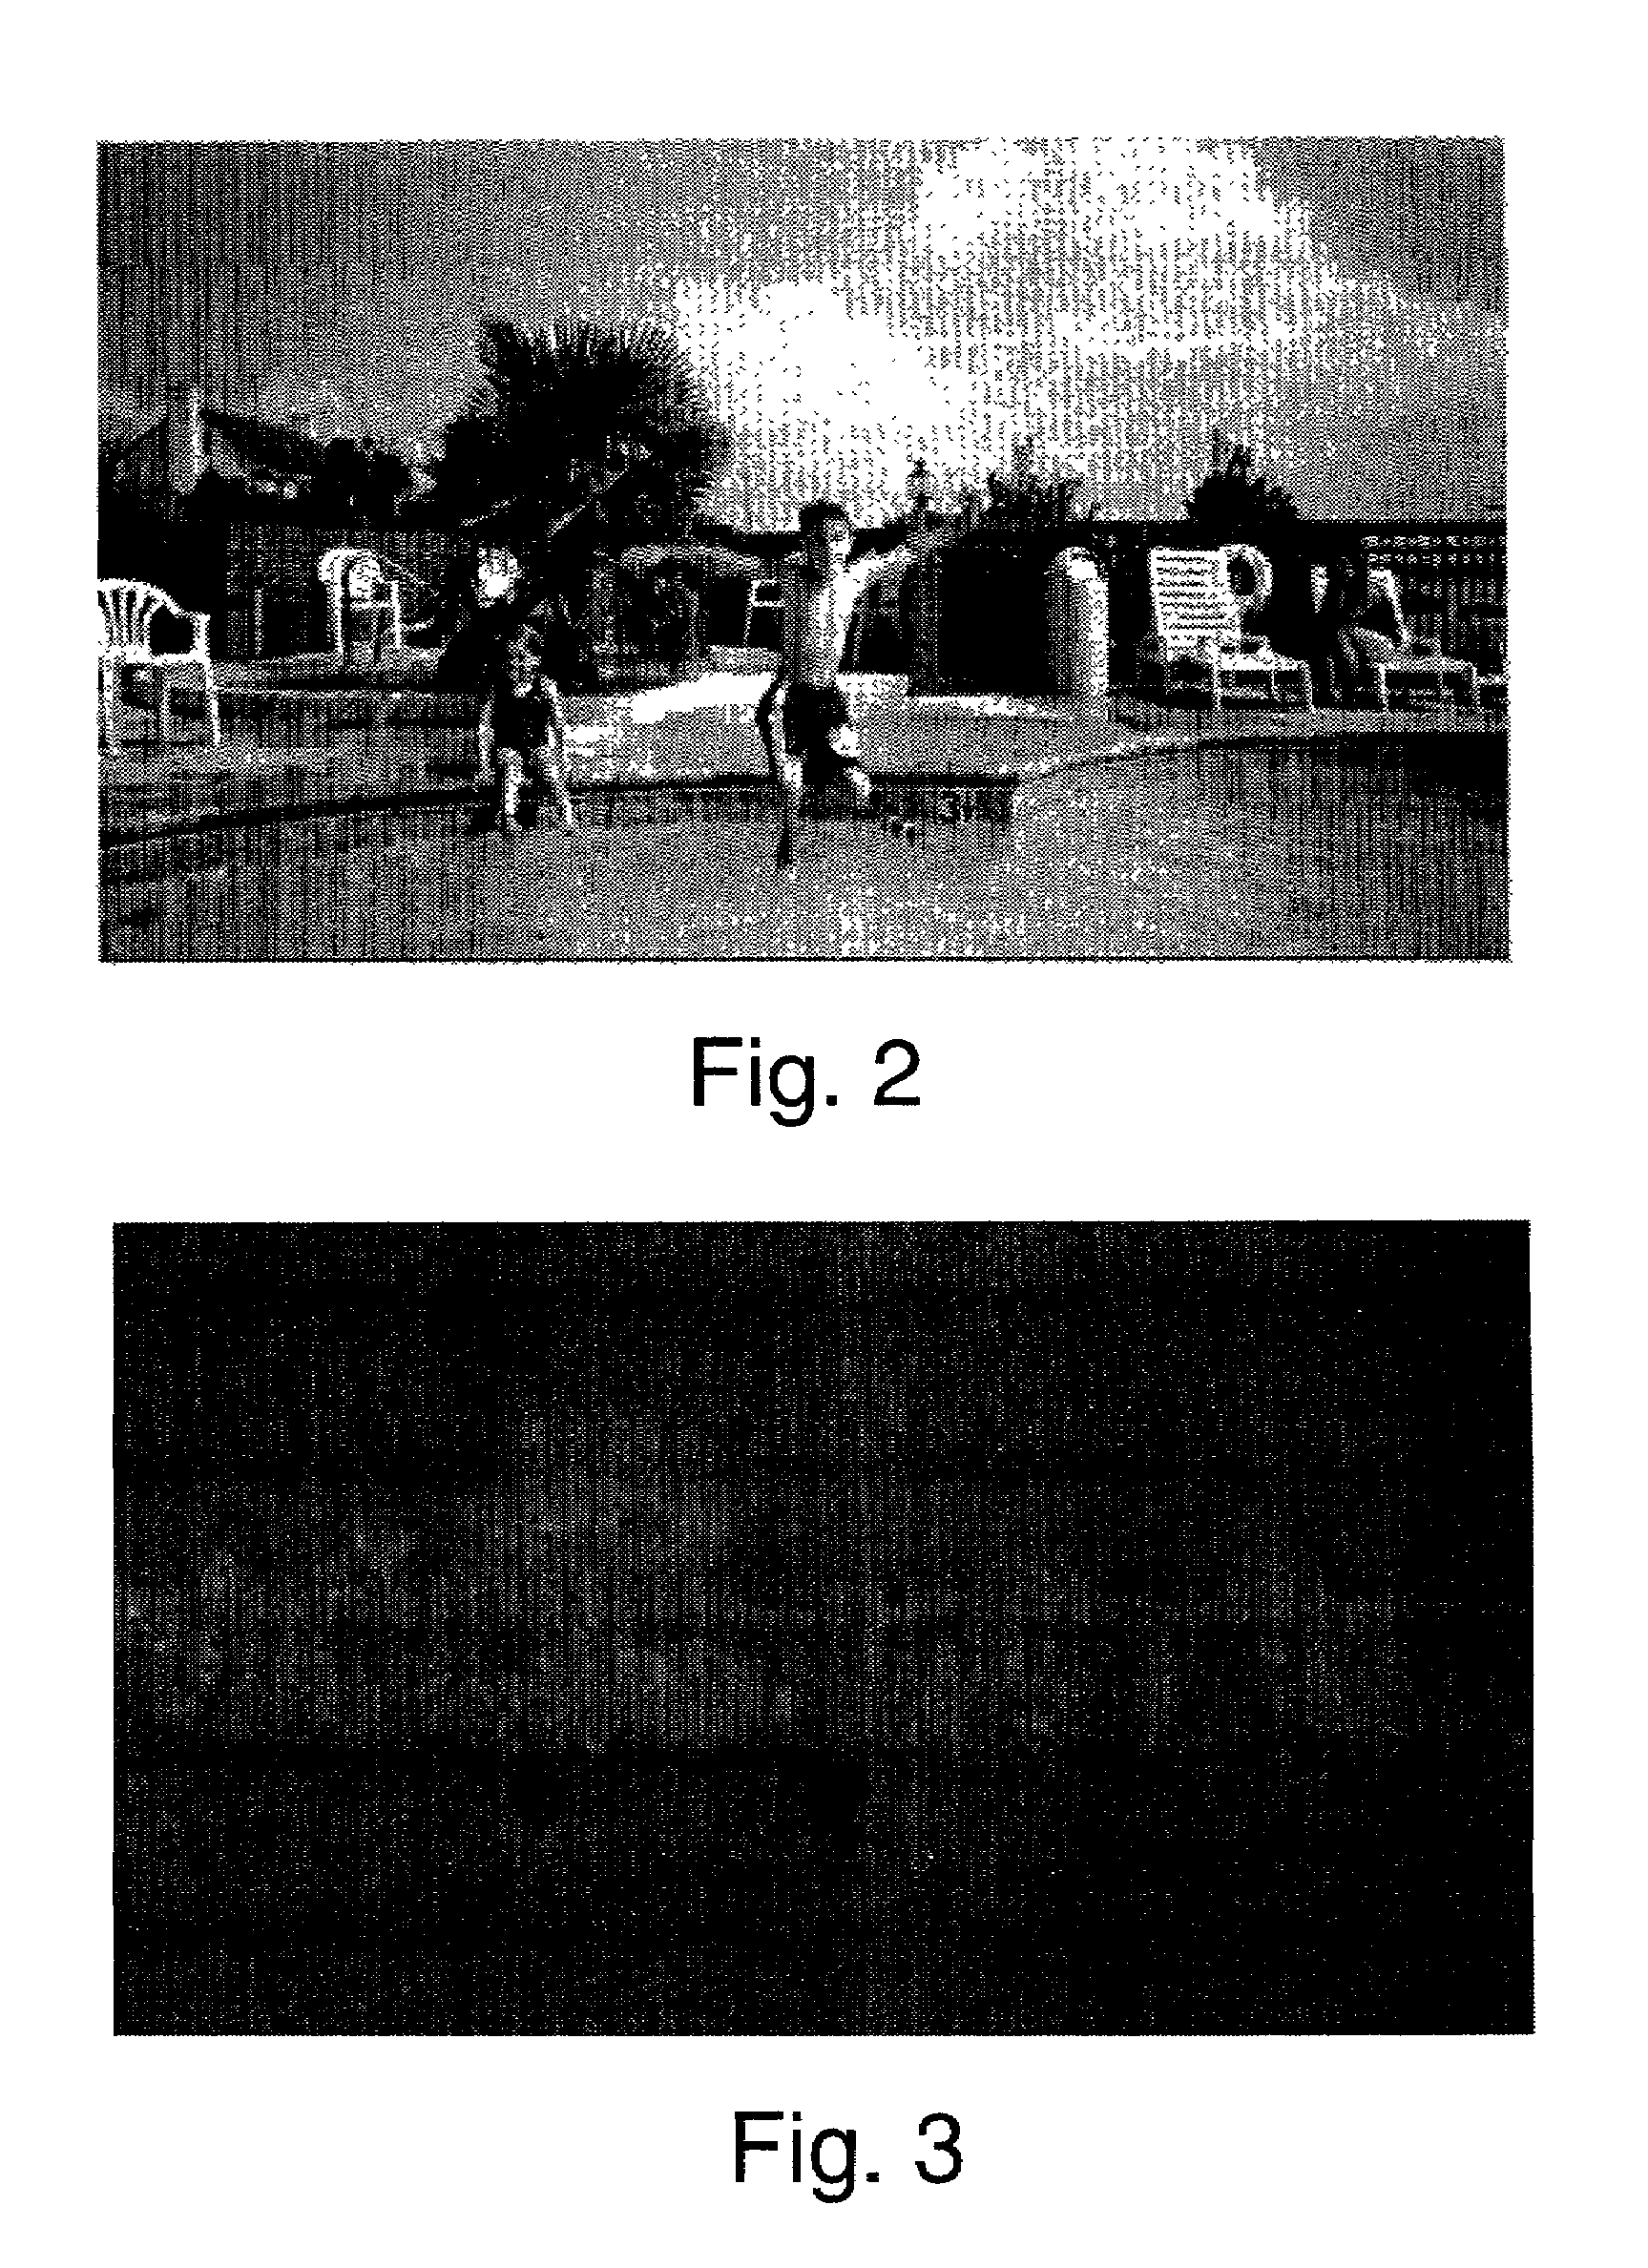 Method for image region classification using unsupervised and supervised learning